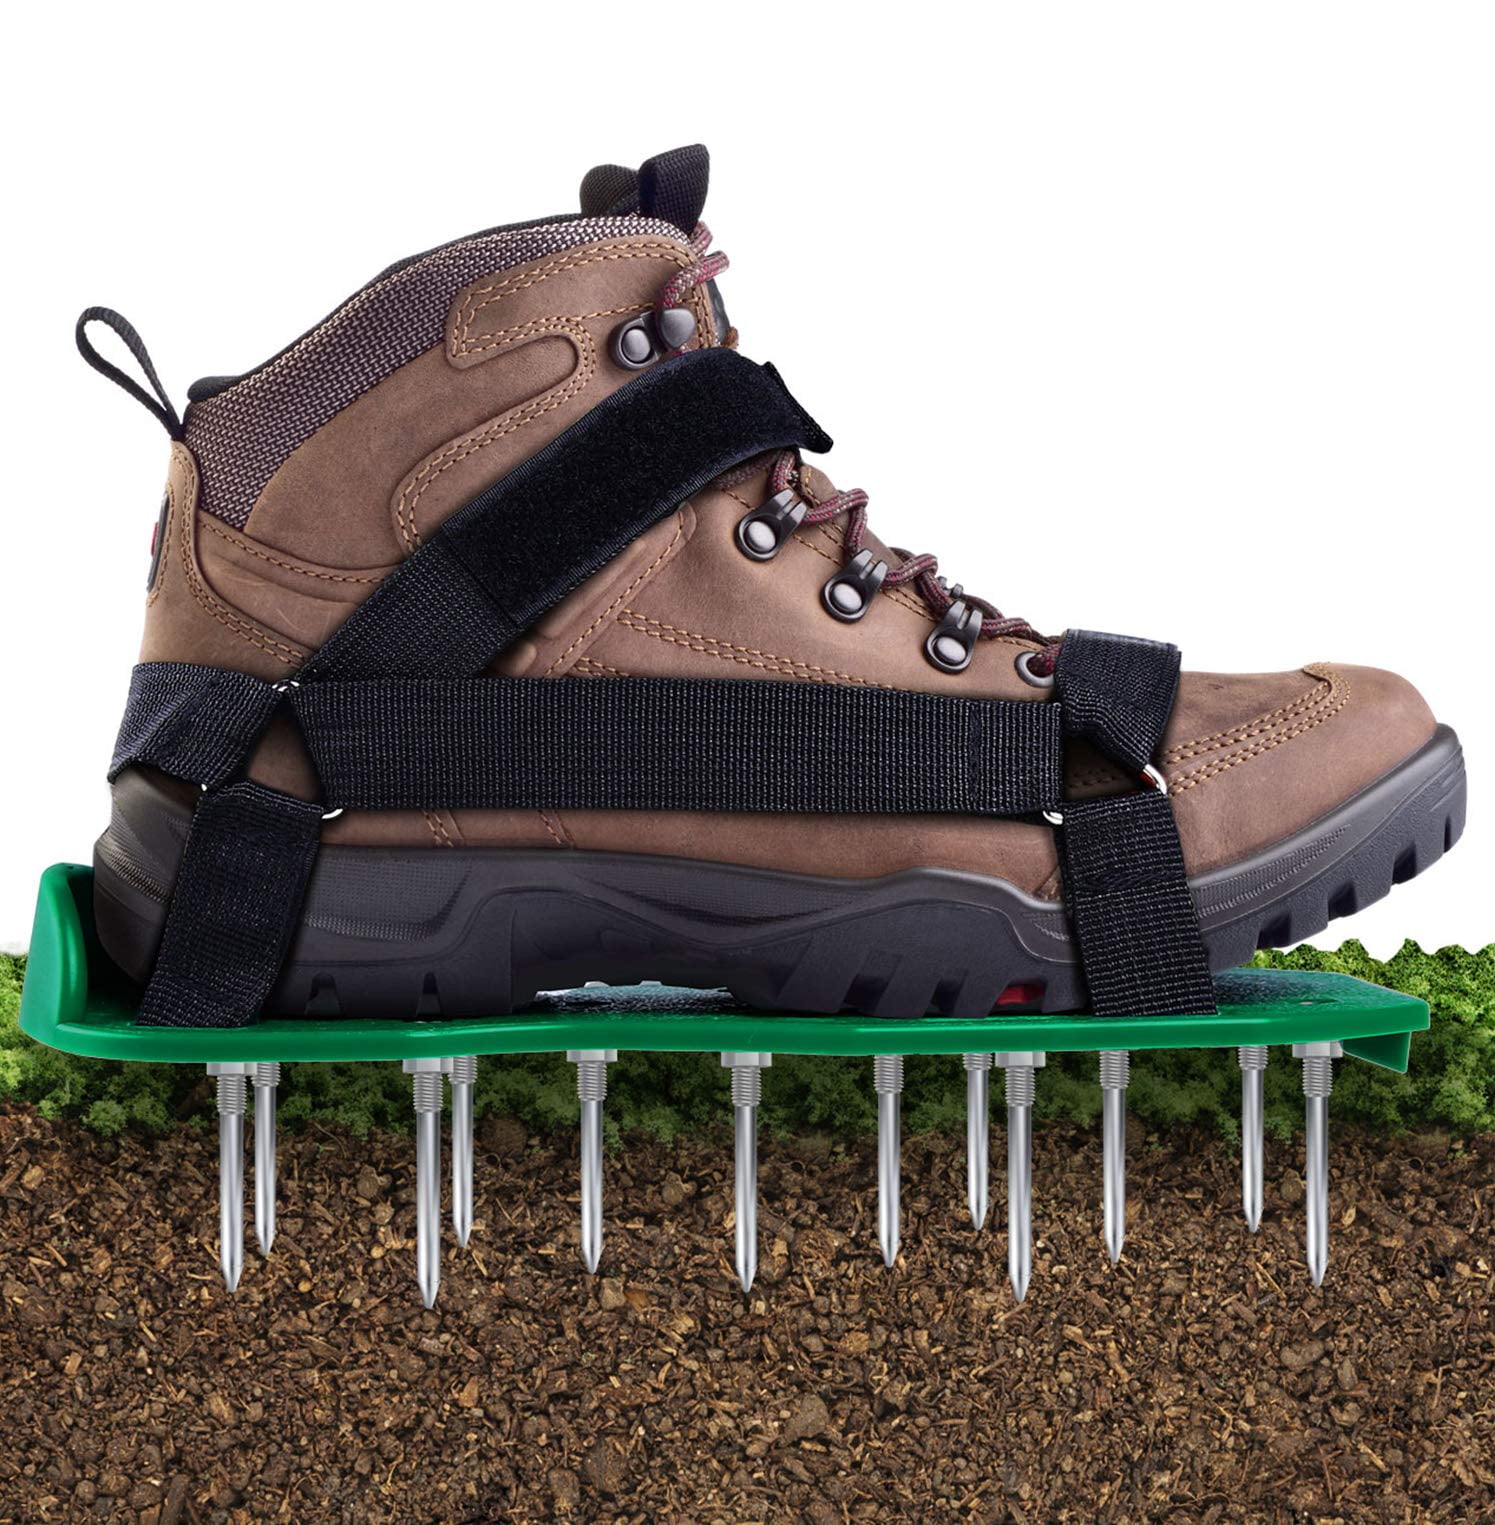 Shoes Aerator Spikes Lawn Shoe Aerators Sandals Metal Heavy Duty Updated Garden 